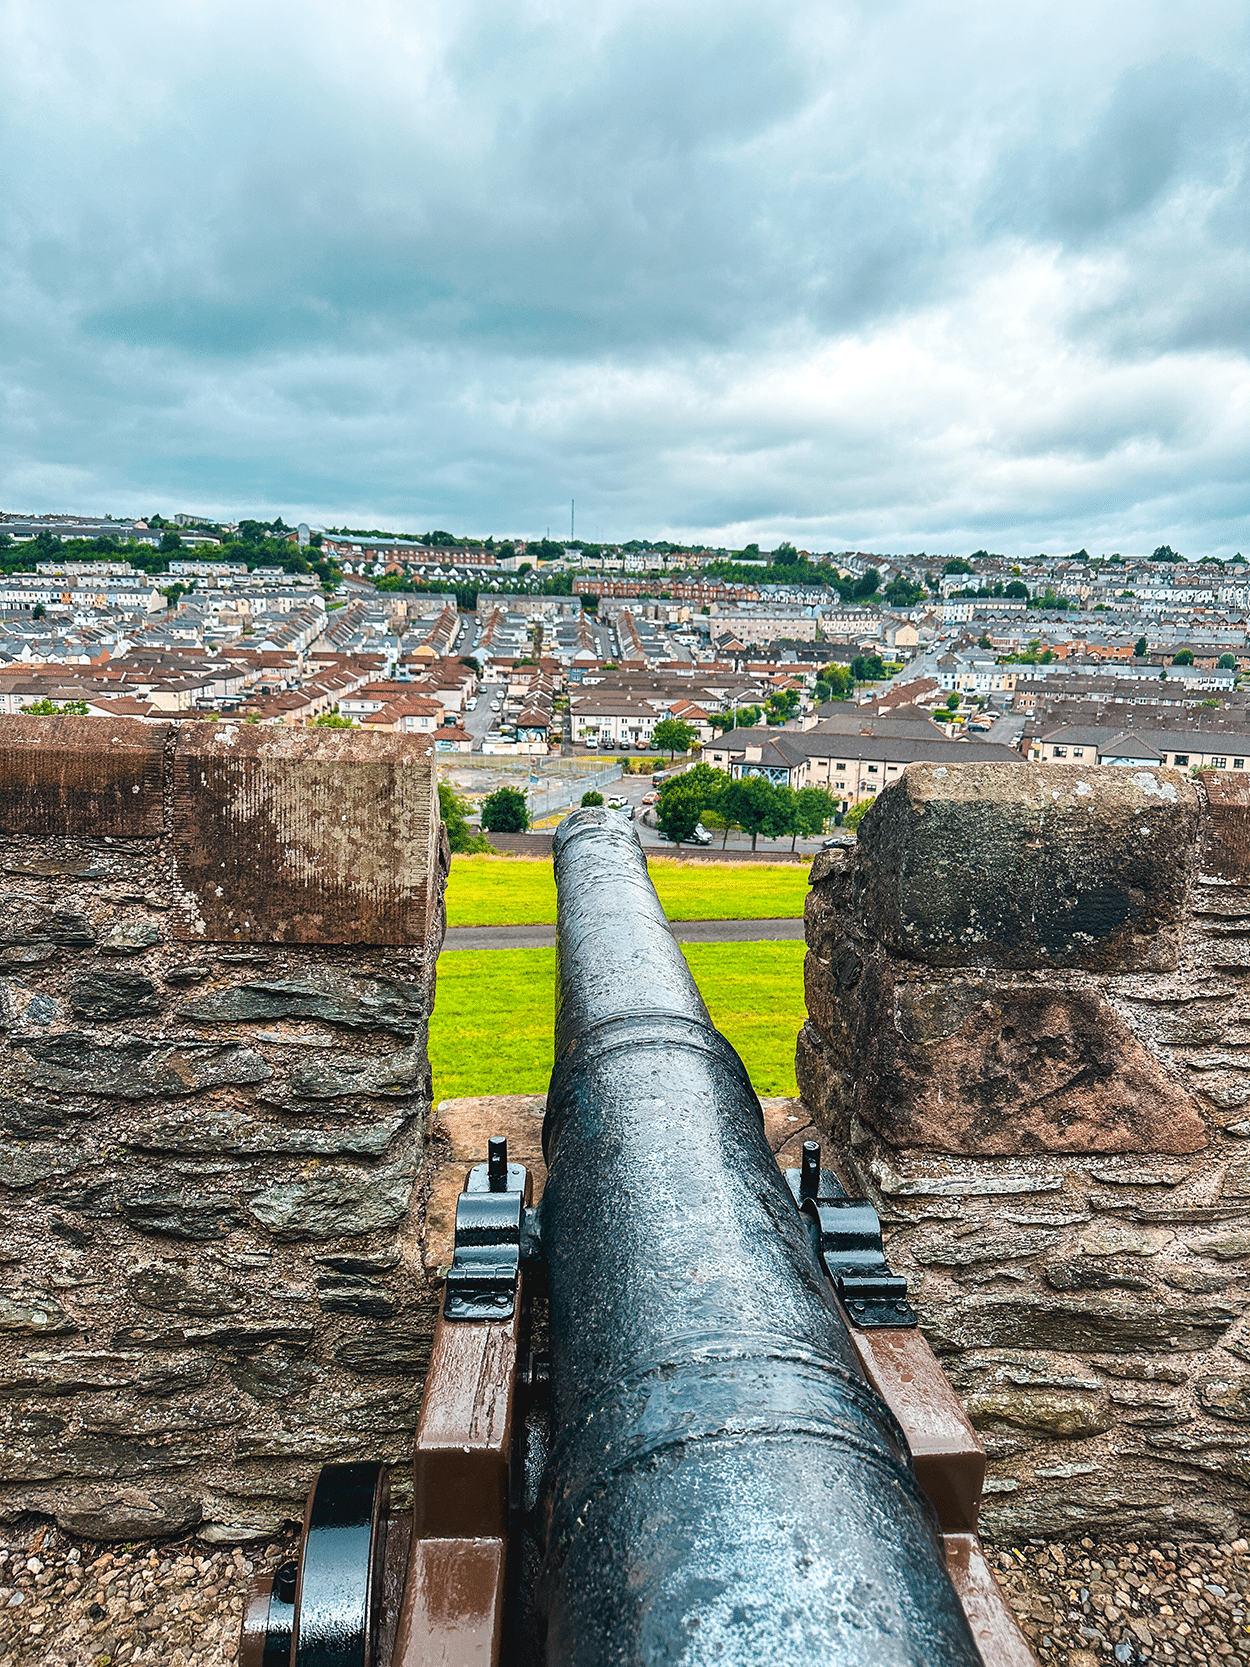 Historic cannons on The Derry Wall in Londonderry/ Derry Northern Ireland- photo by Keryn Means editor of TwistTravelMag.com